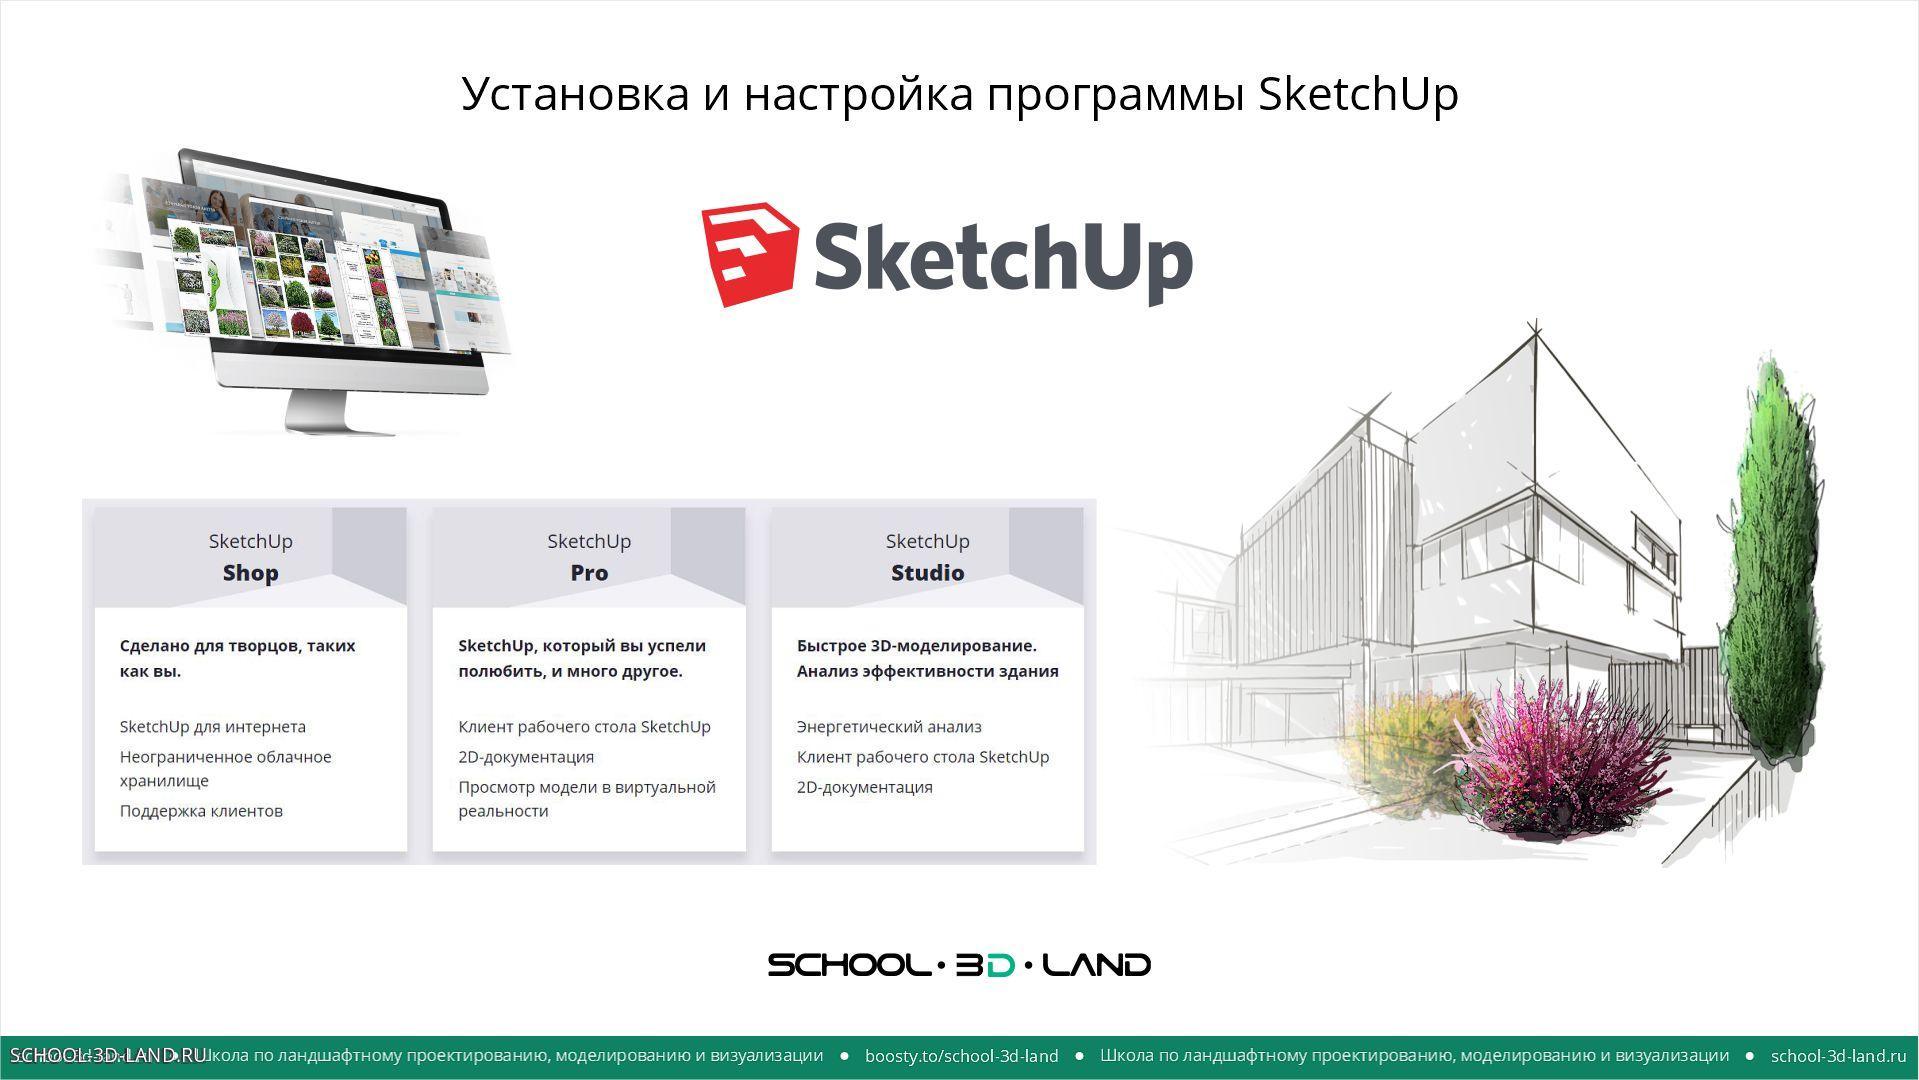 Installing and configuring SketchUp